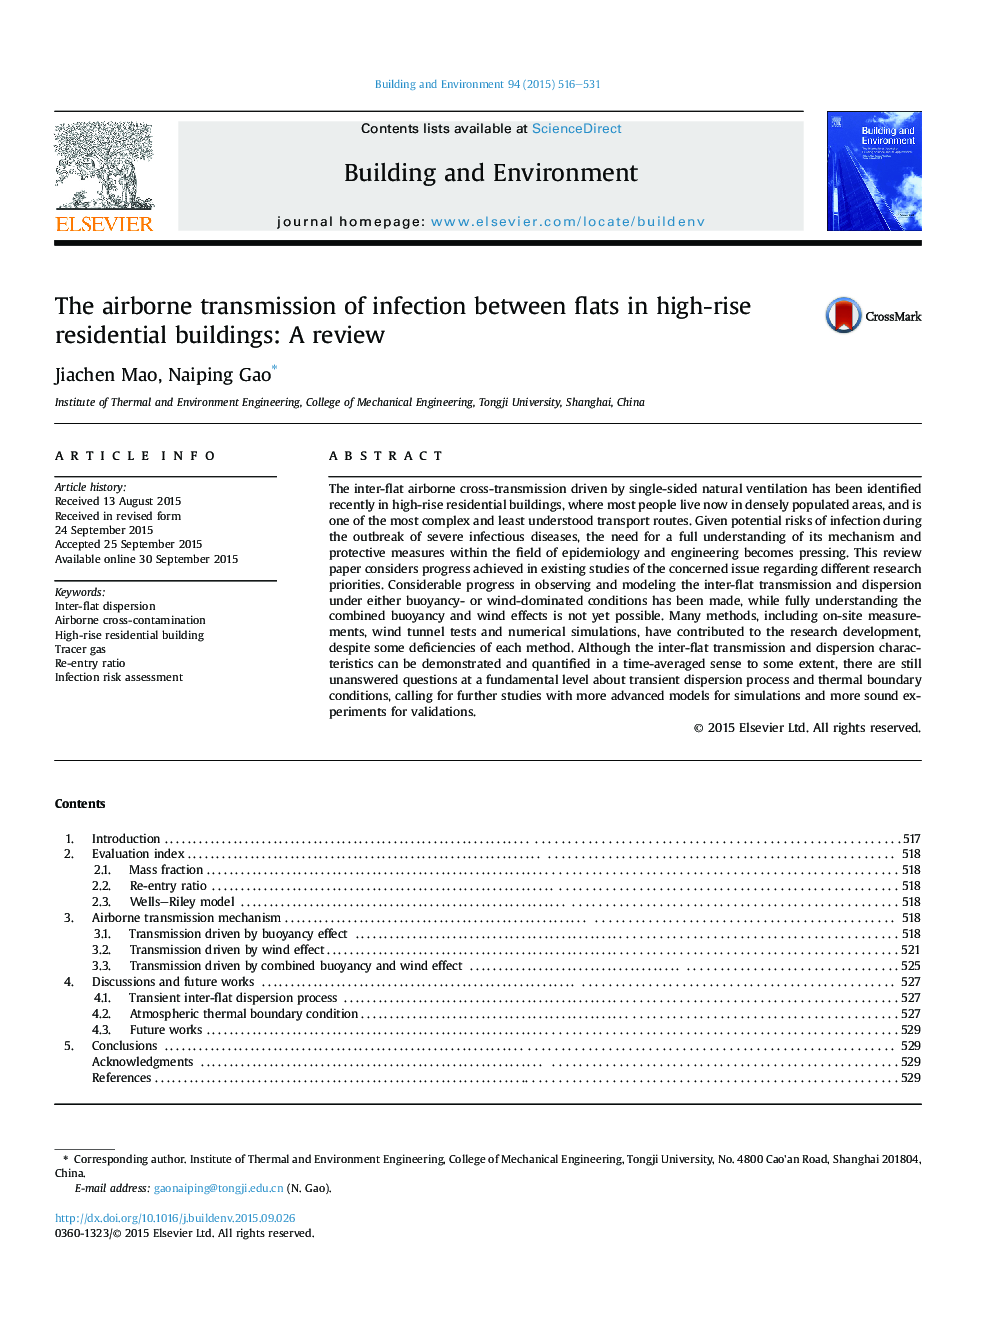 The airborne transmission of infection between flats in high-rise residential buildings: A review